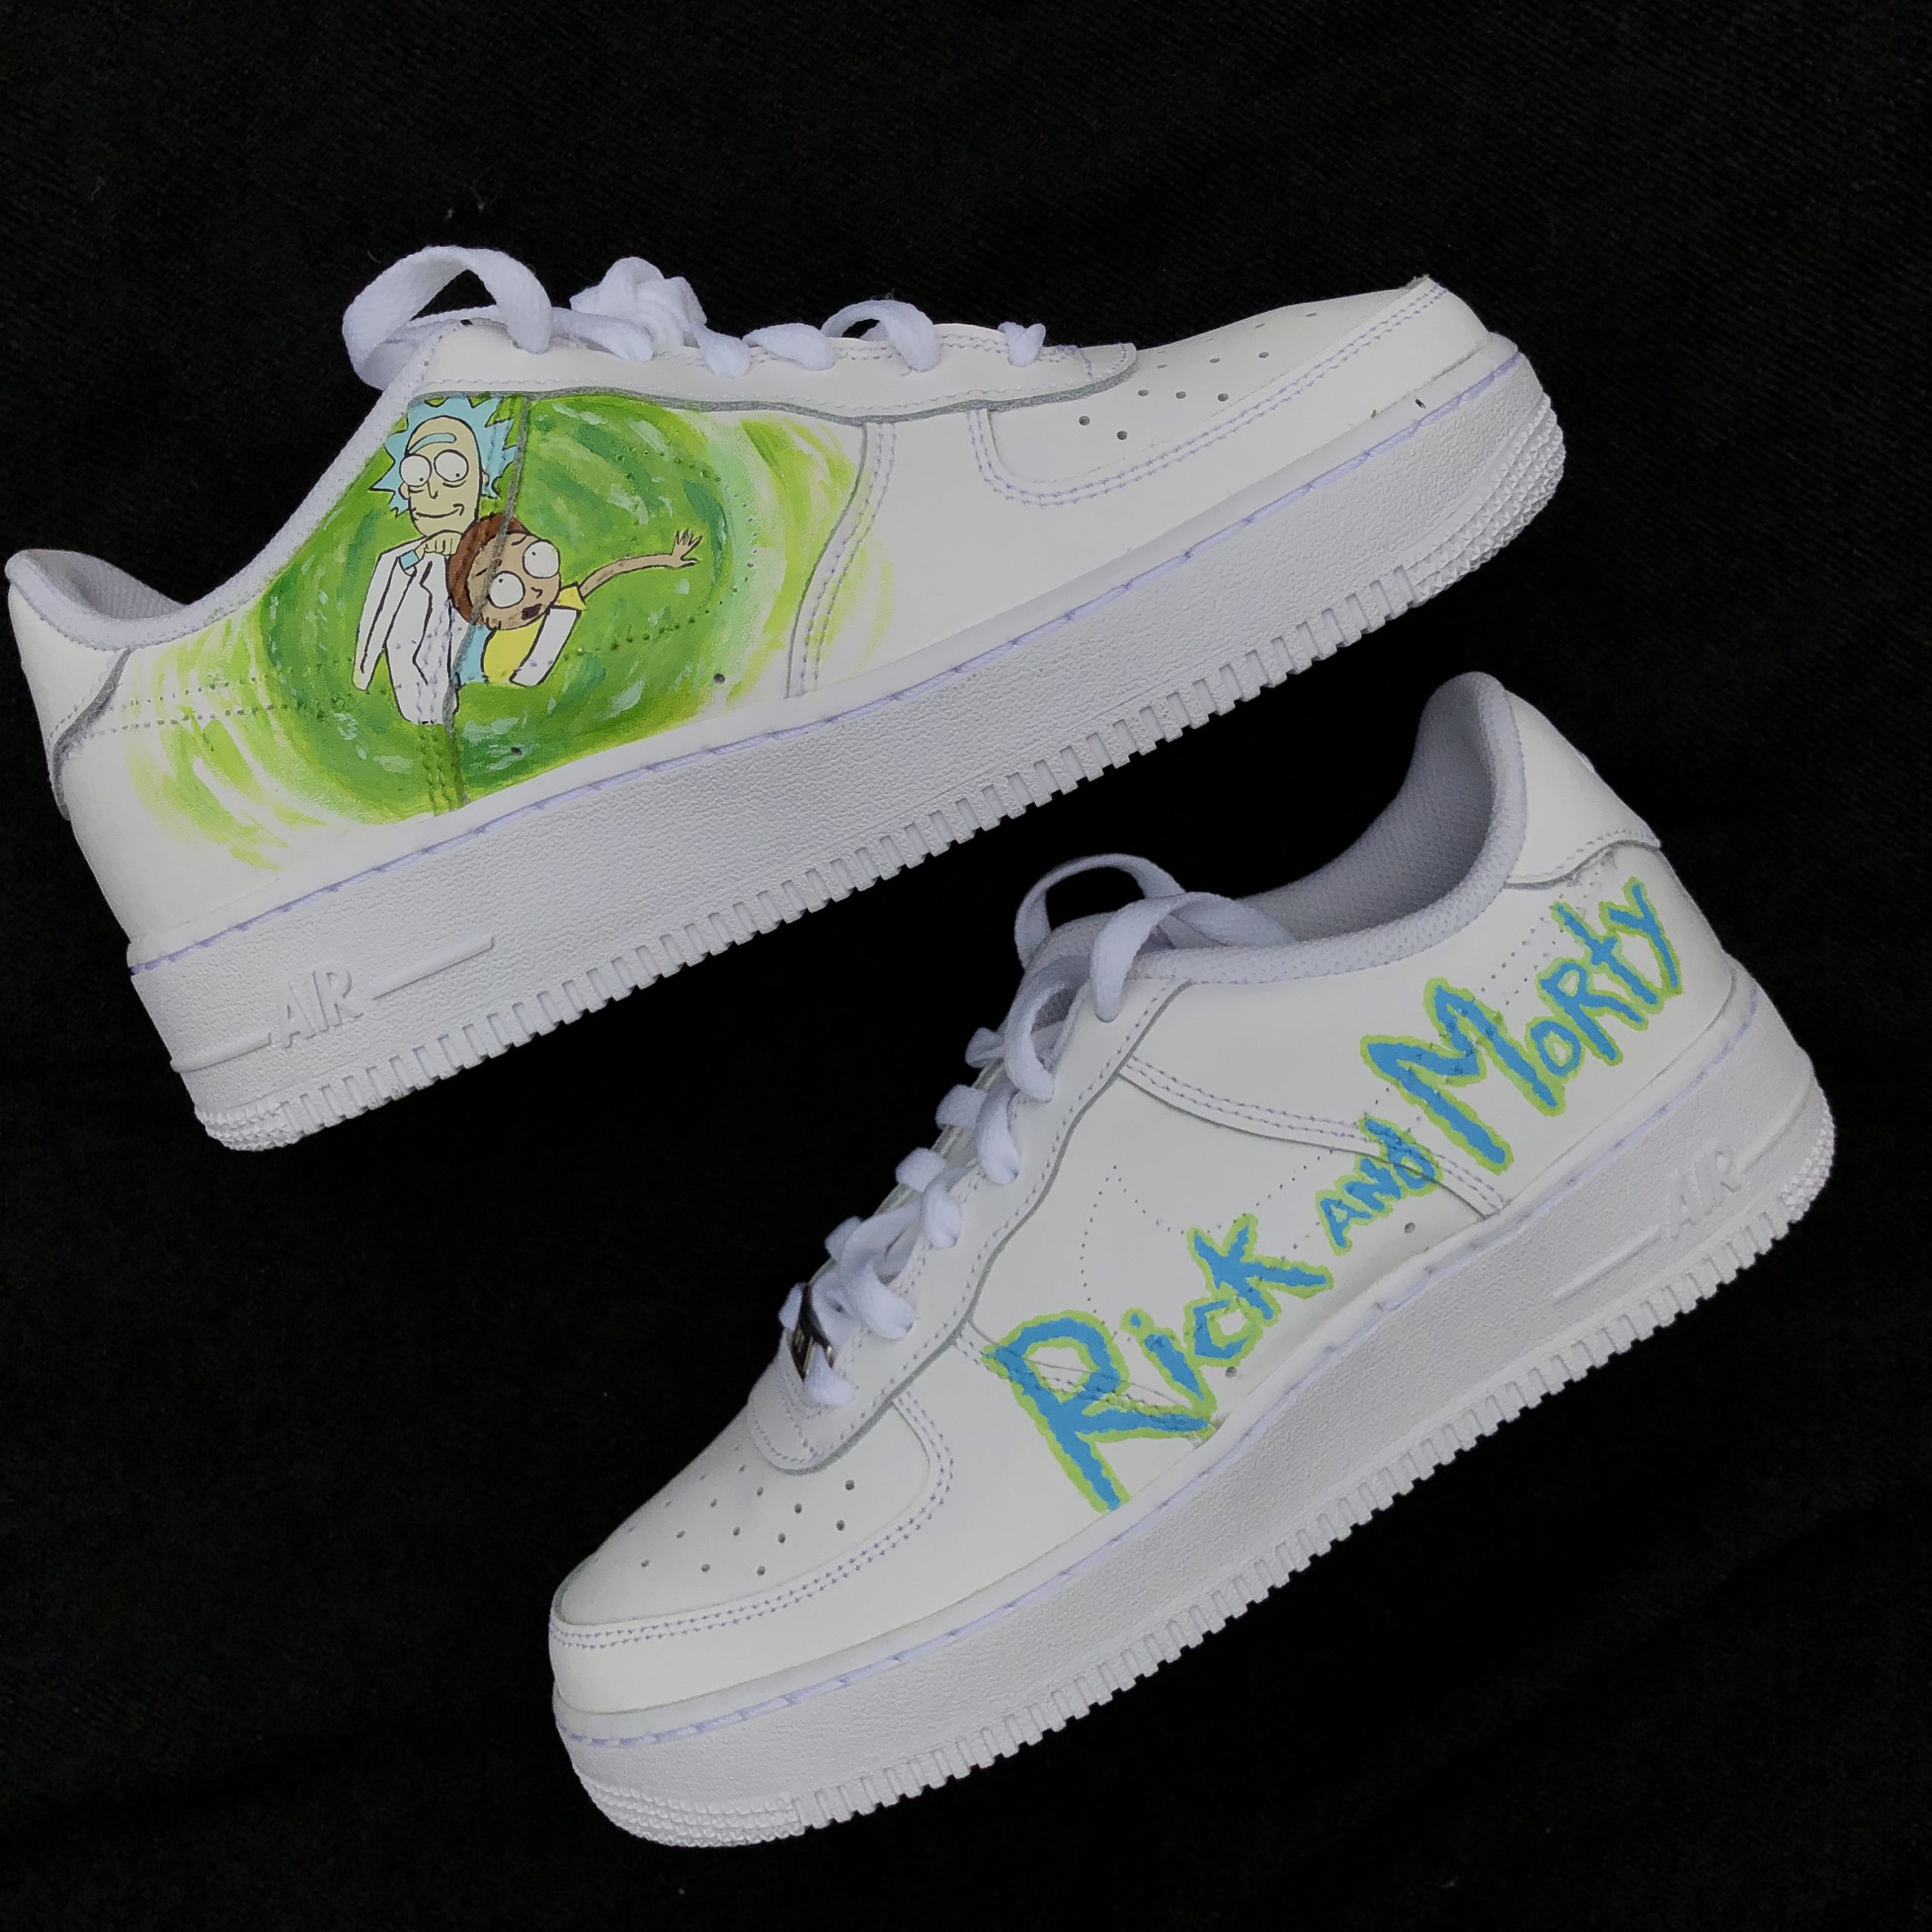 Rick and morty shoes